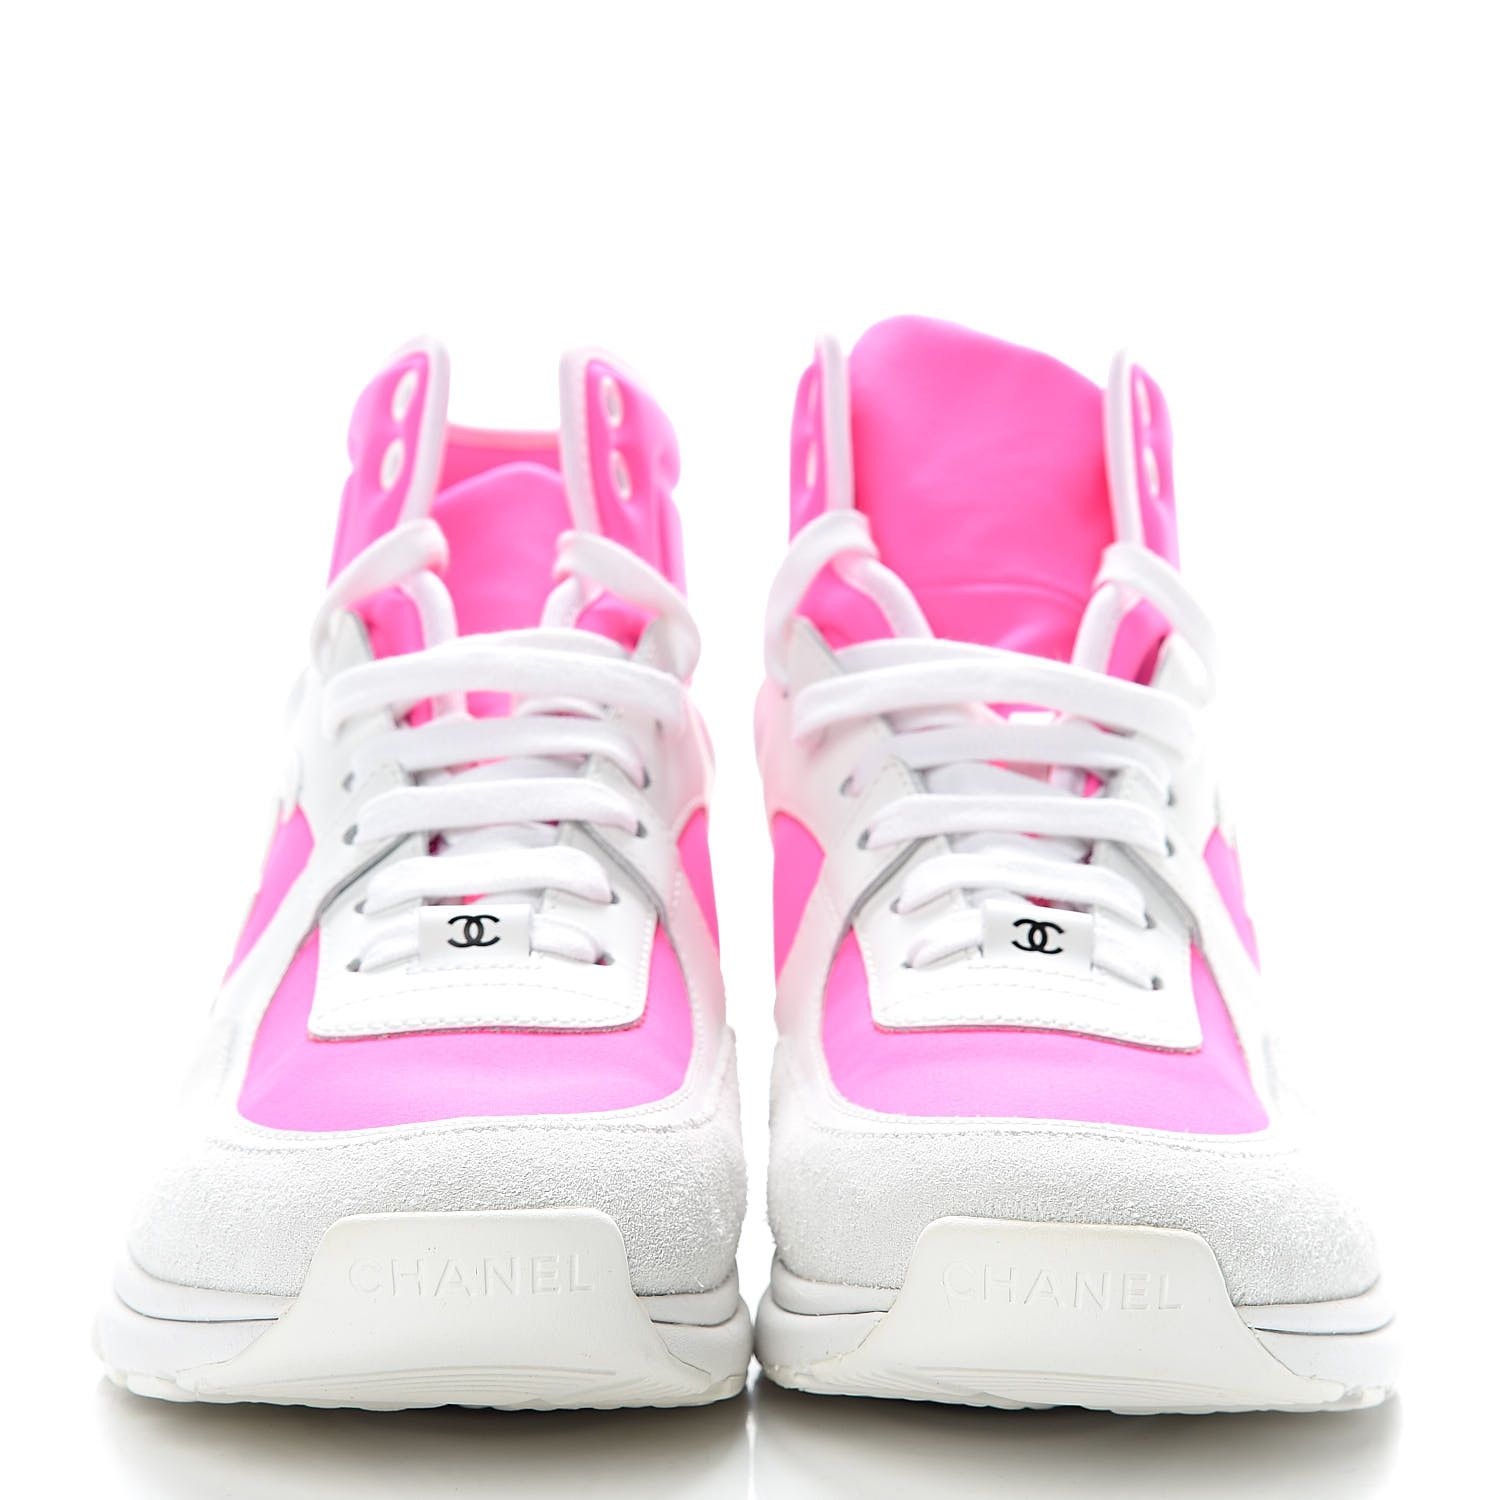 chanel high top sneakers pink